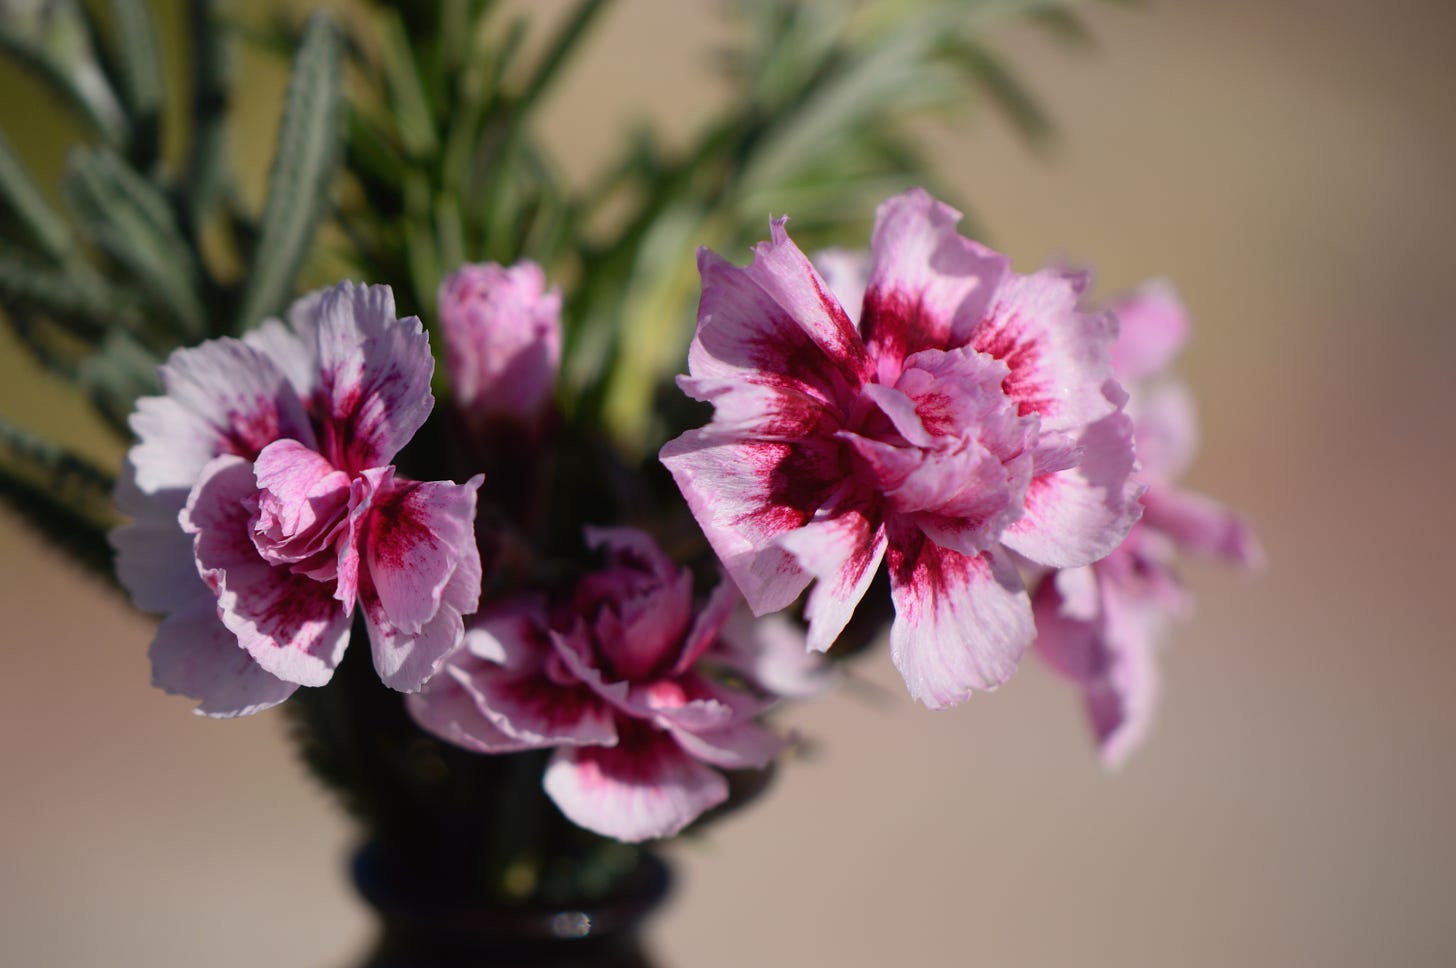 carnations in a vase